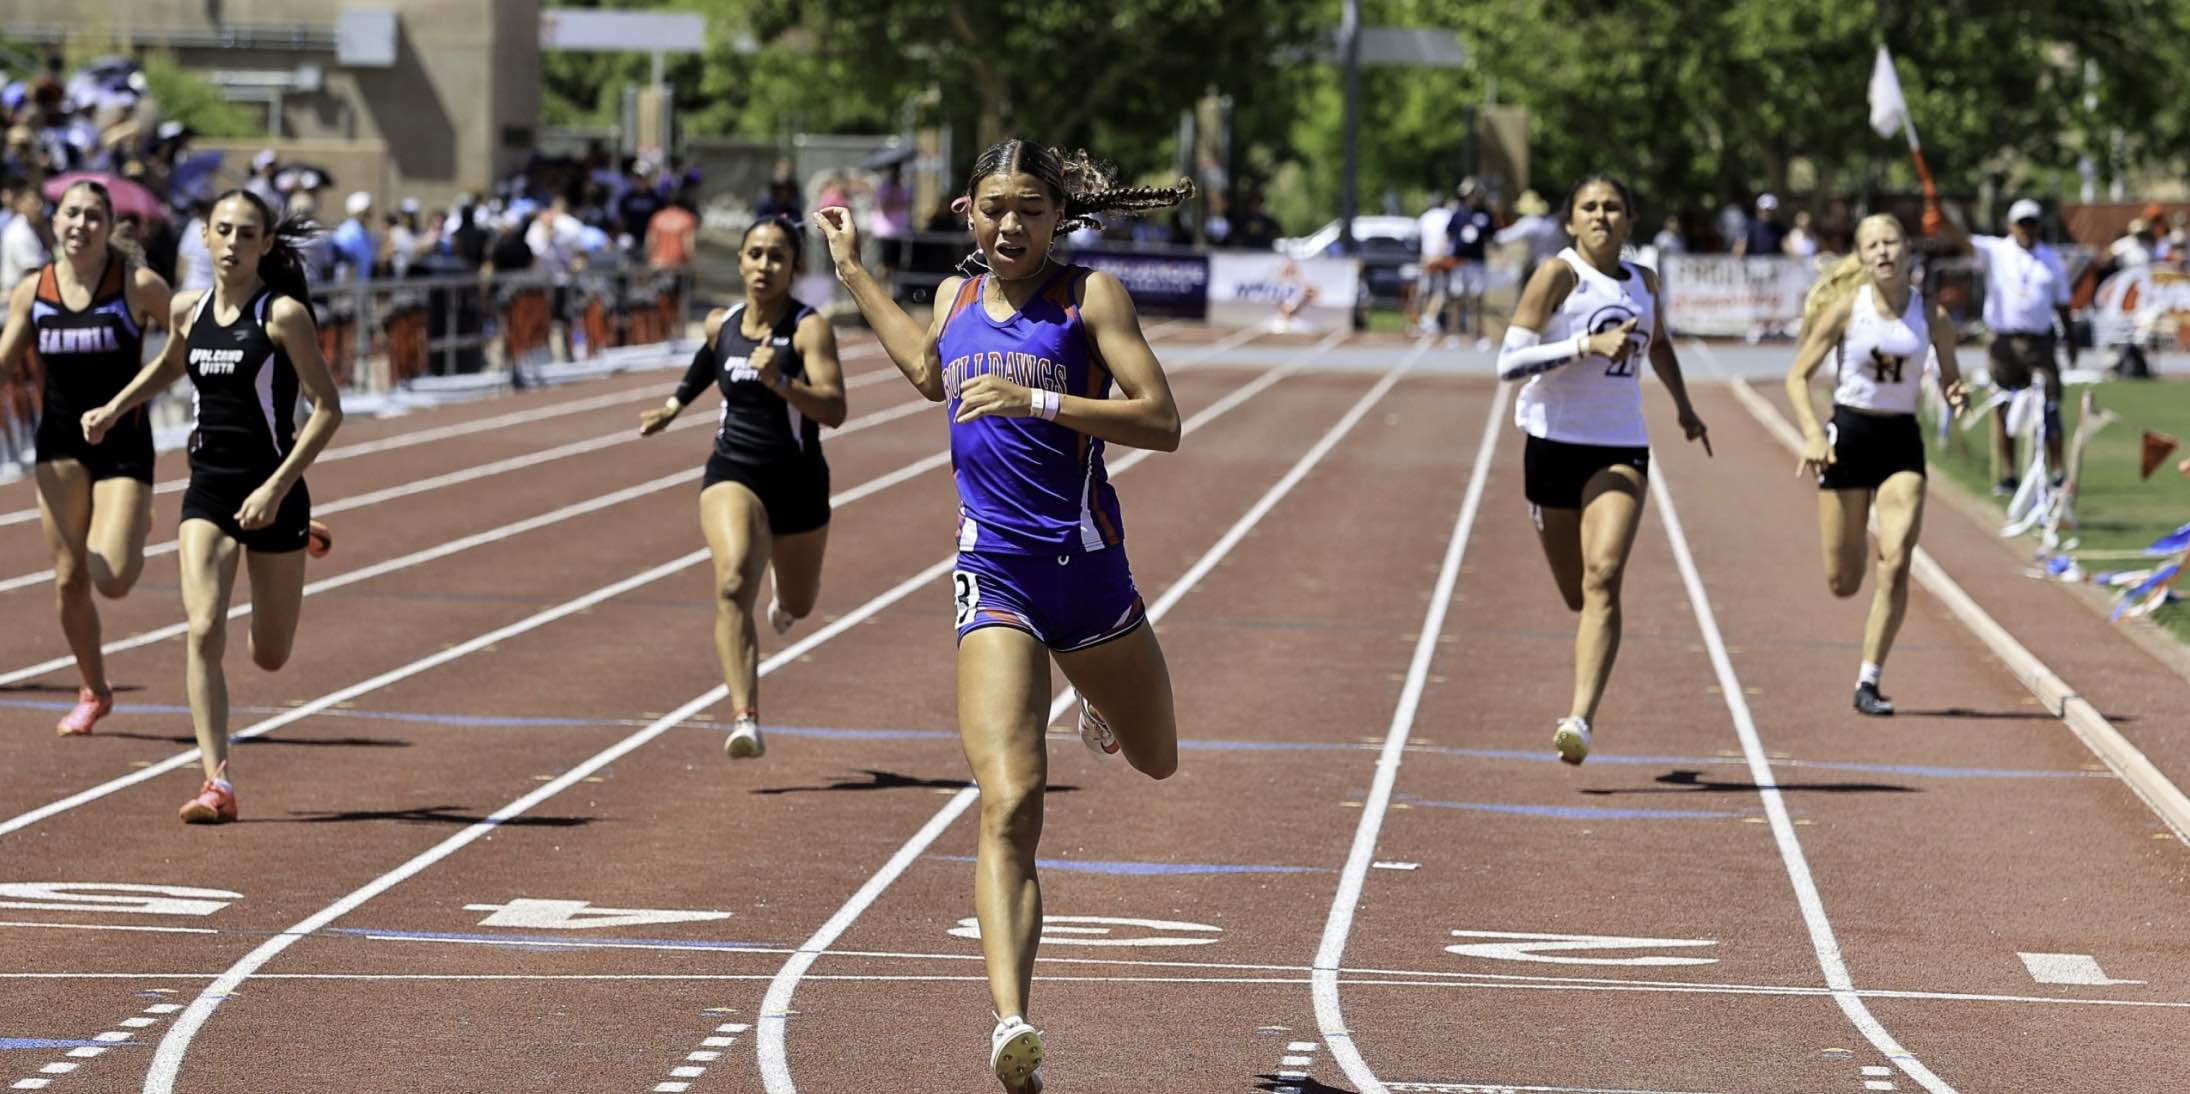 LAS CRUCES HIGH SCHOOL STUDENT-ATHLETE NAMED GATORADE NEW MEXICO GIRLS TRACK & FIELD PLAYER OF THE YEAR